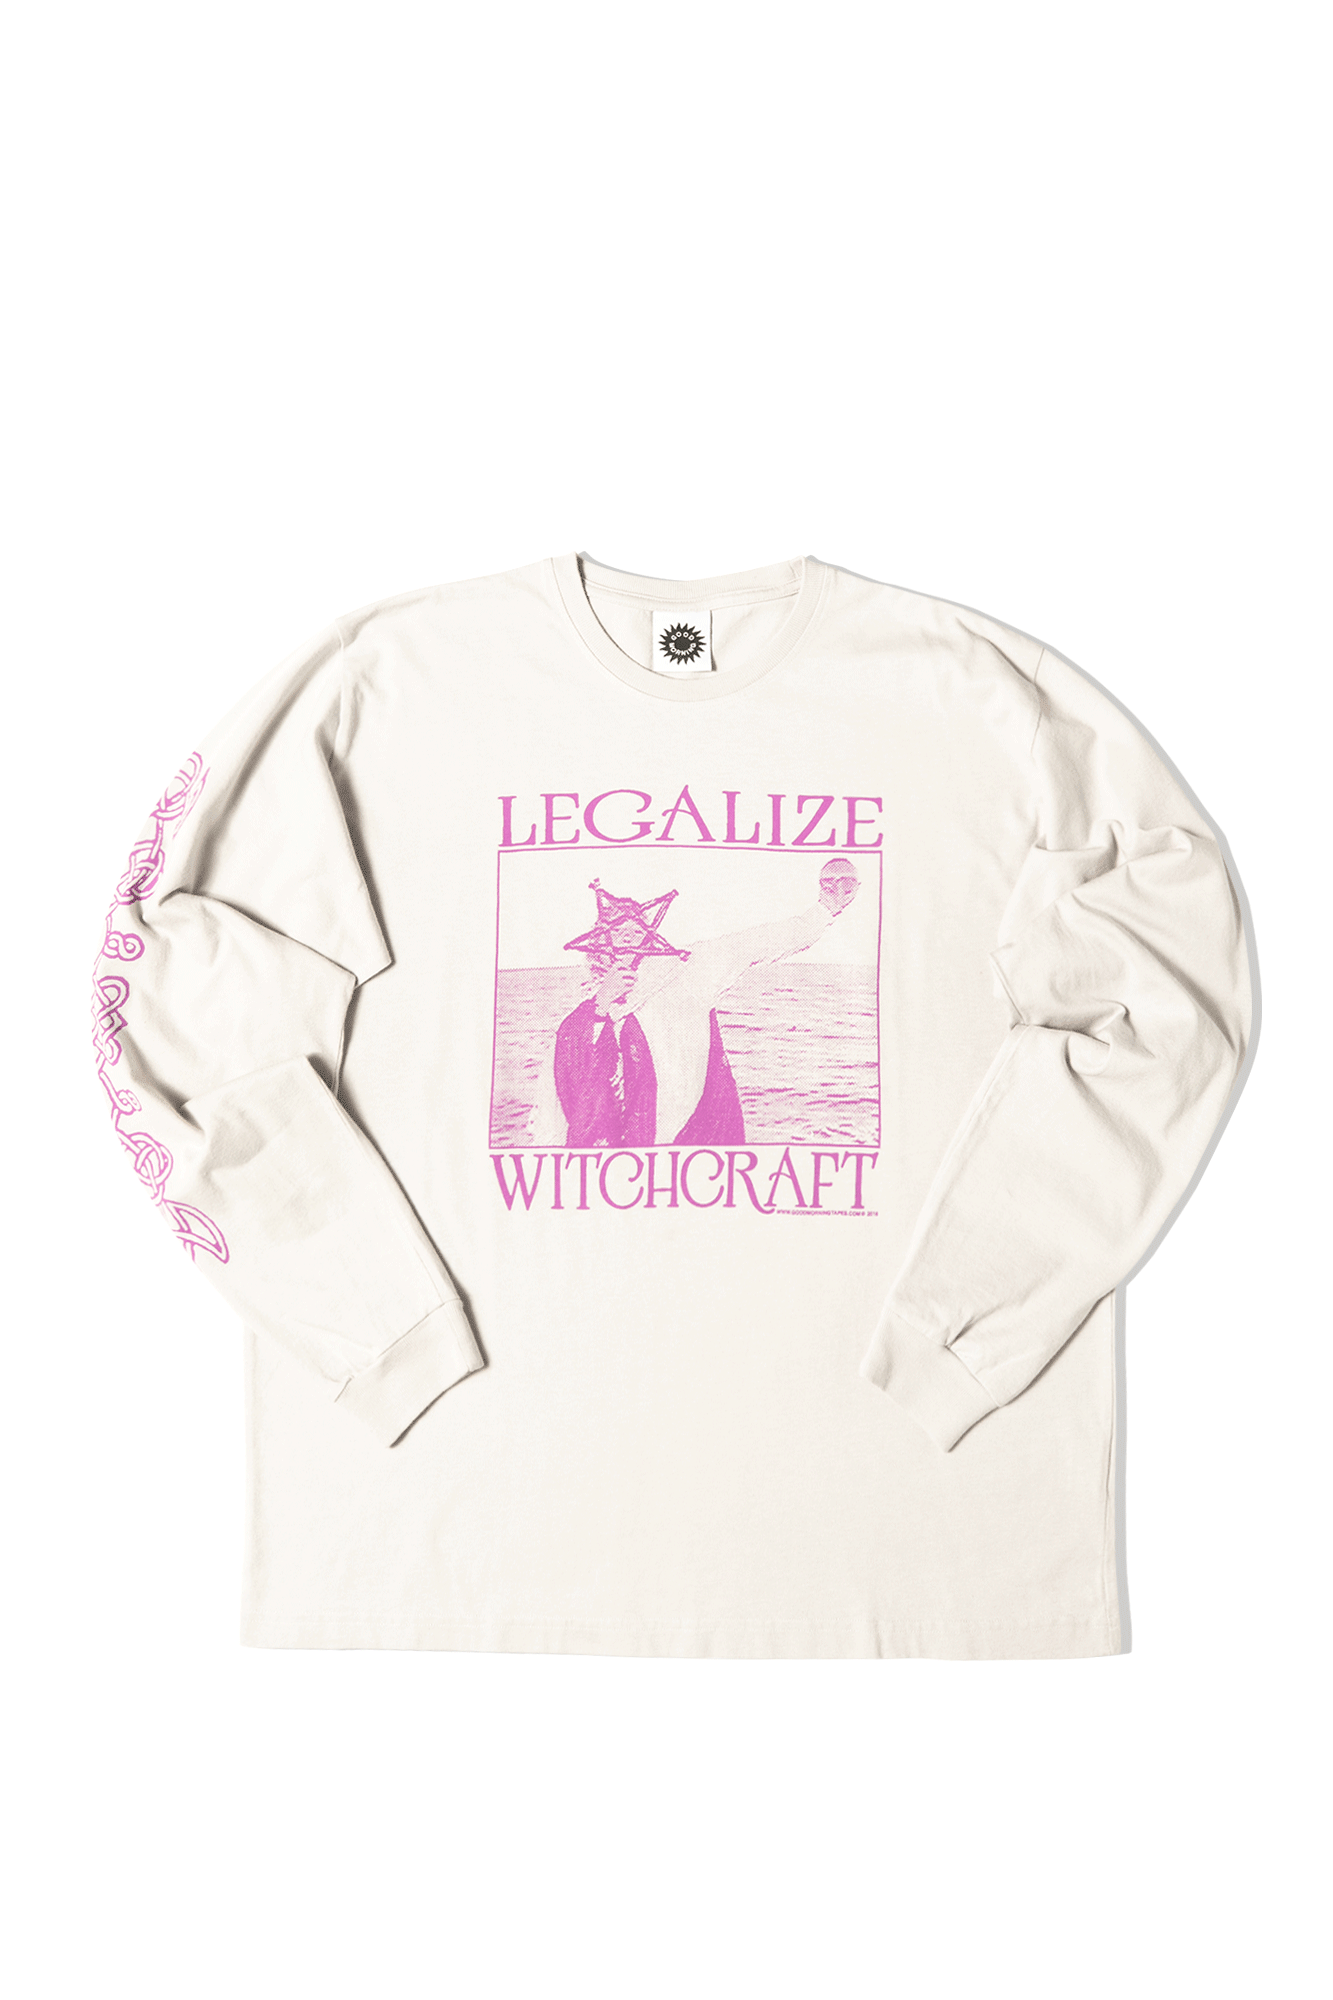 Long Sleeve Legalize Witchcraft